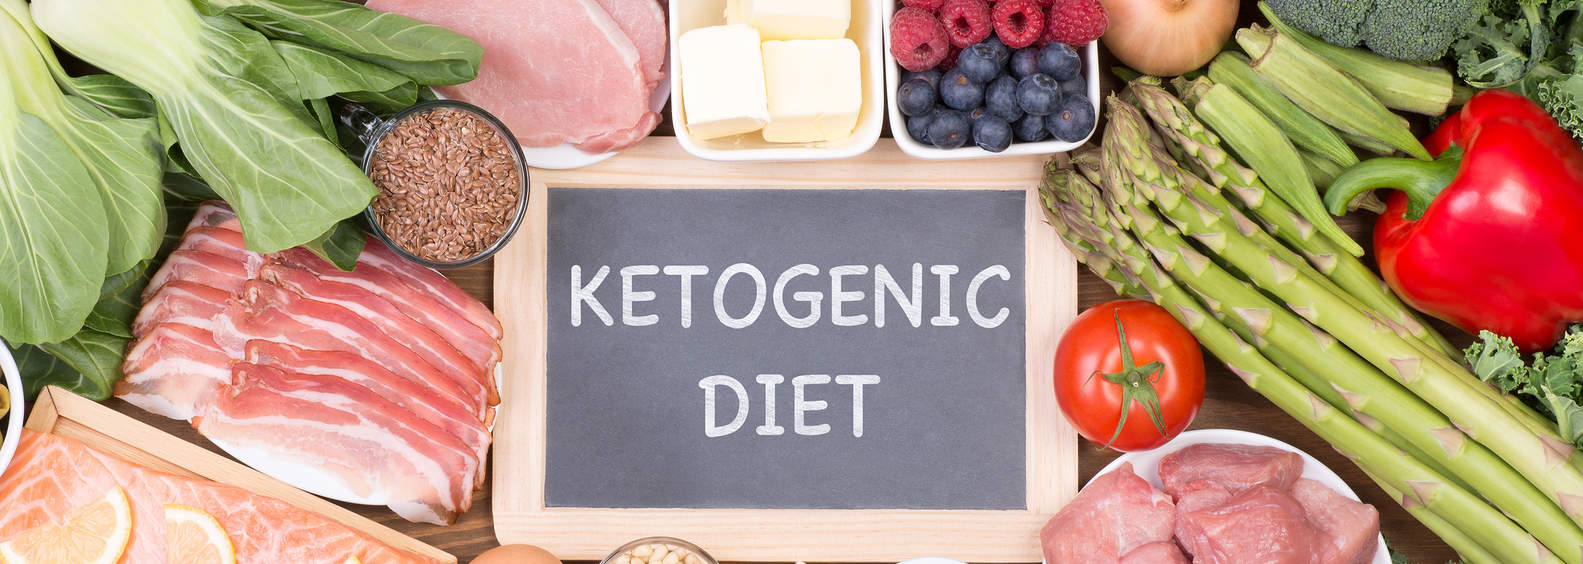 The Ketogenic Diet for Muscle Gain and Fat Loss | Men’s Fit Club